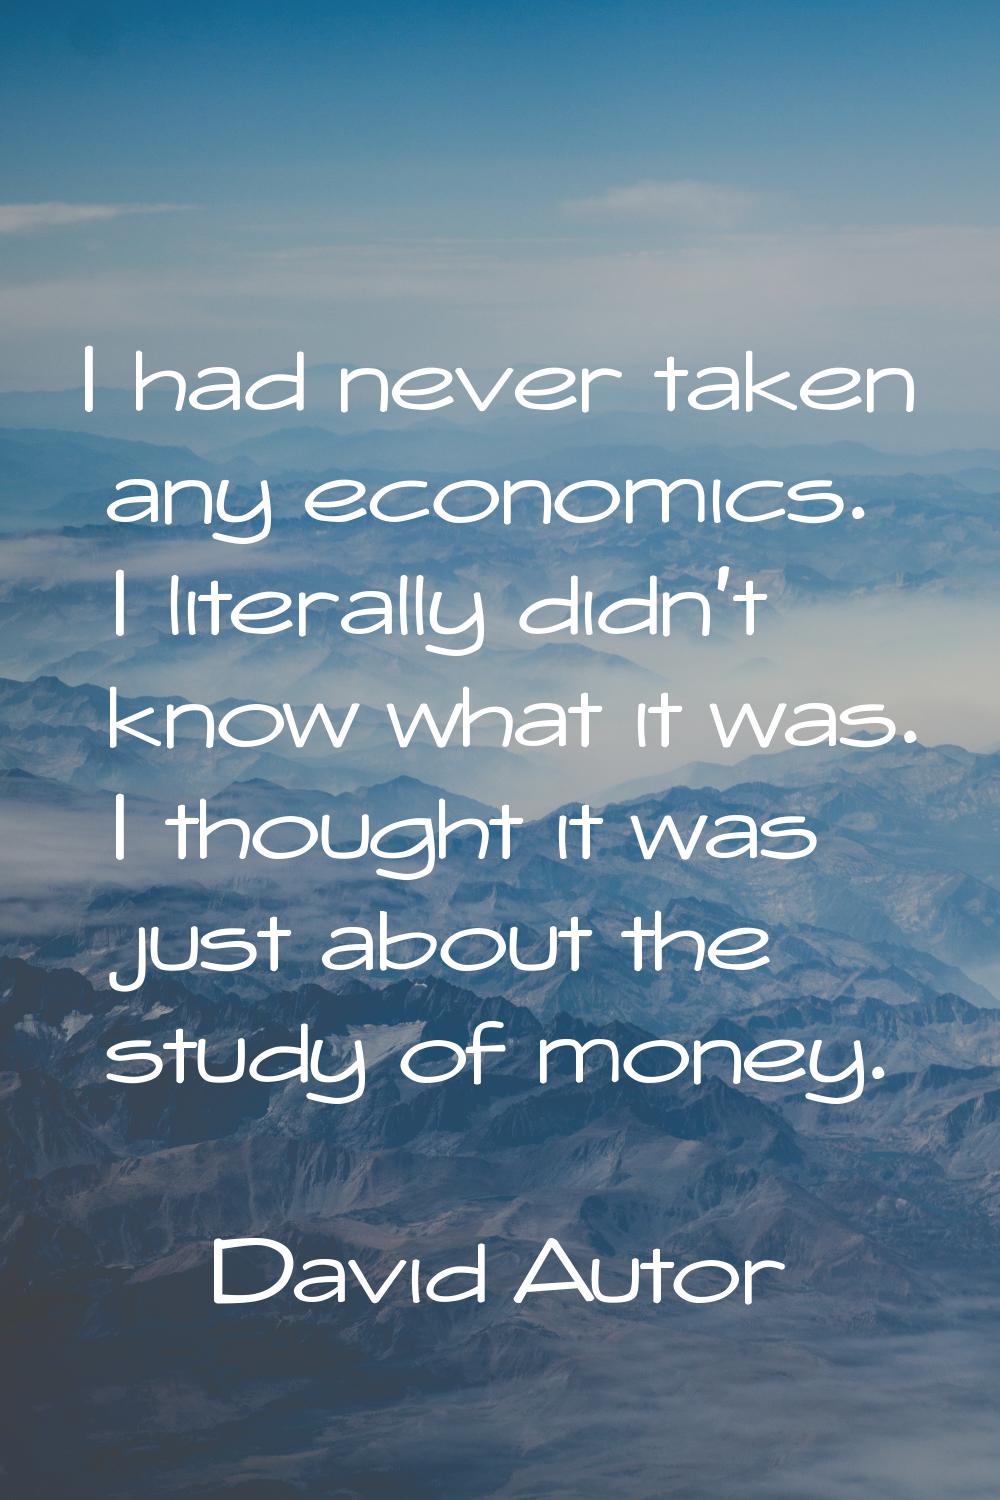 I had never taken any economics. I literally didn't know what it was. I thought it was just about t